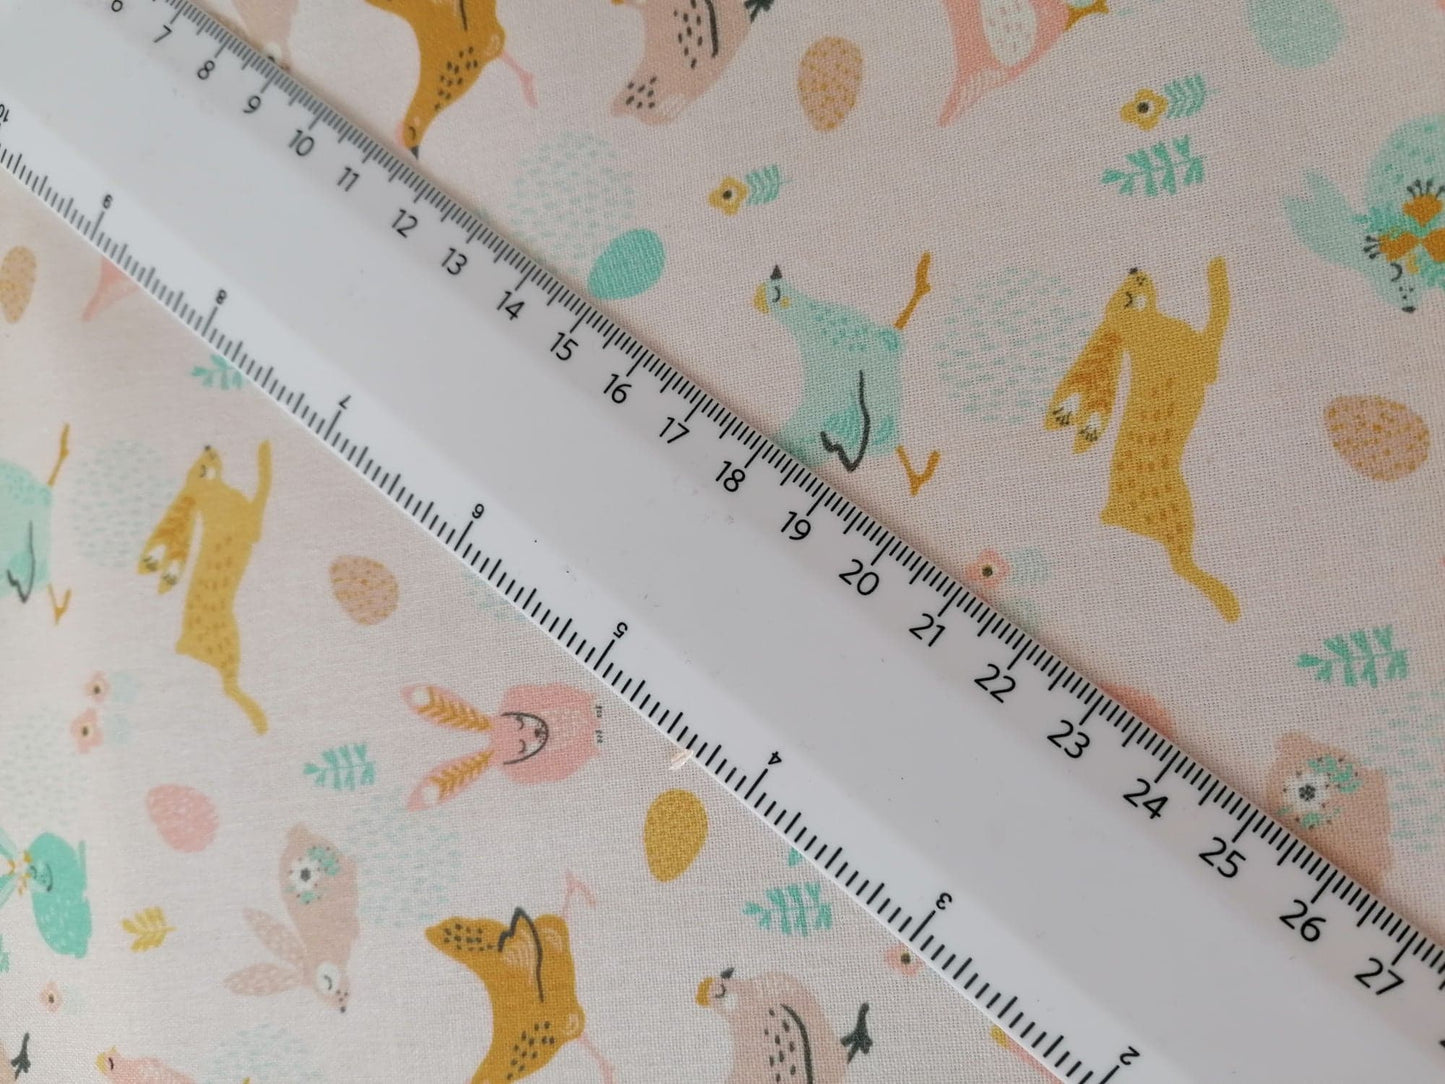 100% Cotton - Crafting & Quilting - White/Pink/Turquoise/Mustard - 44" Wide - Sold By the Metre